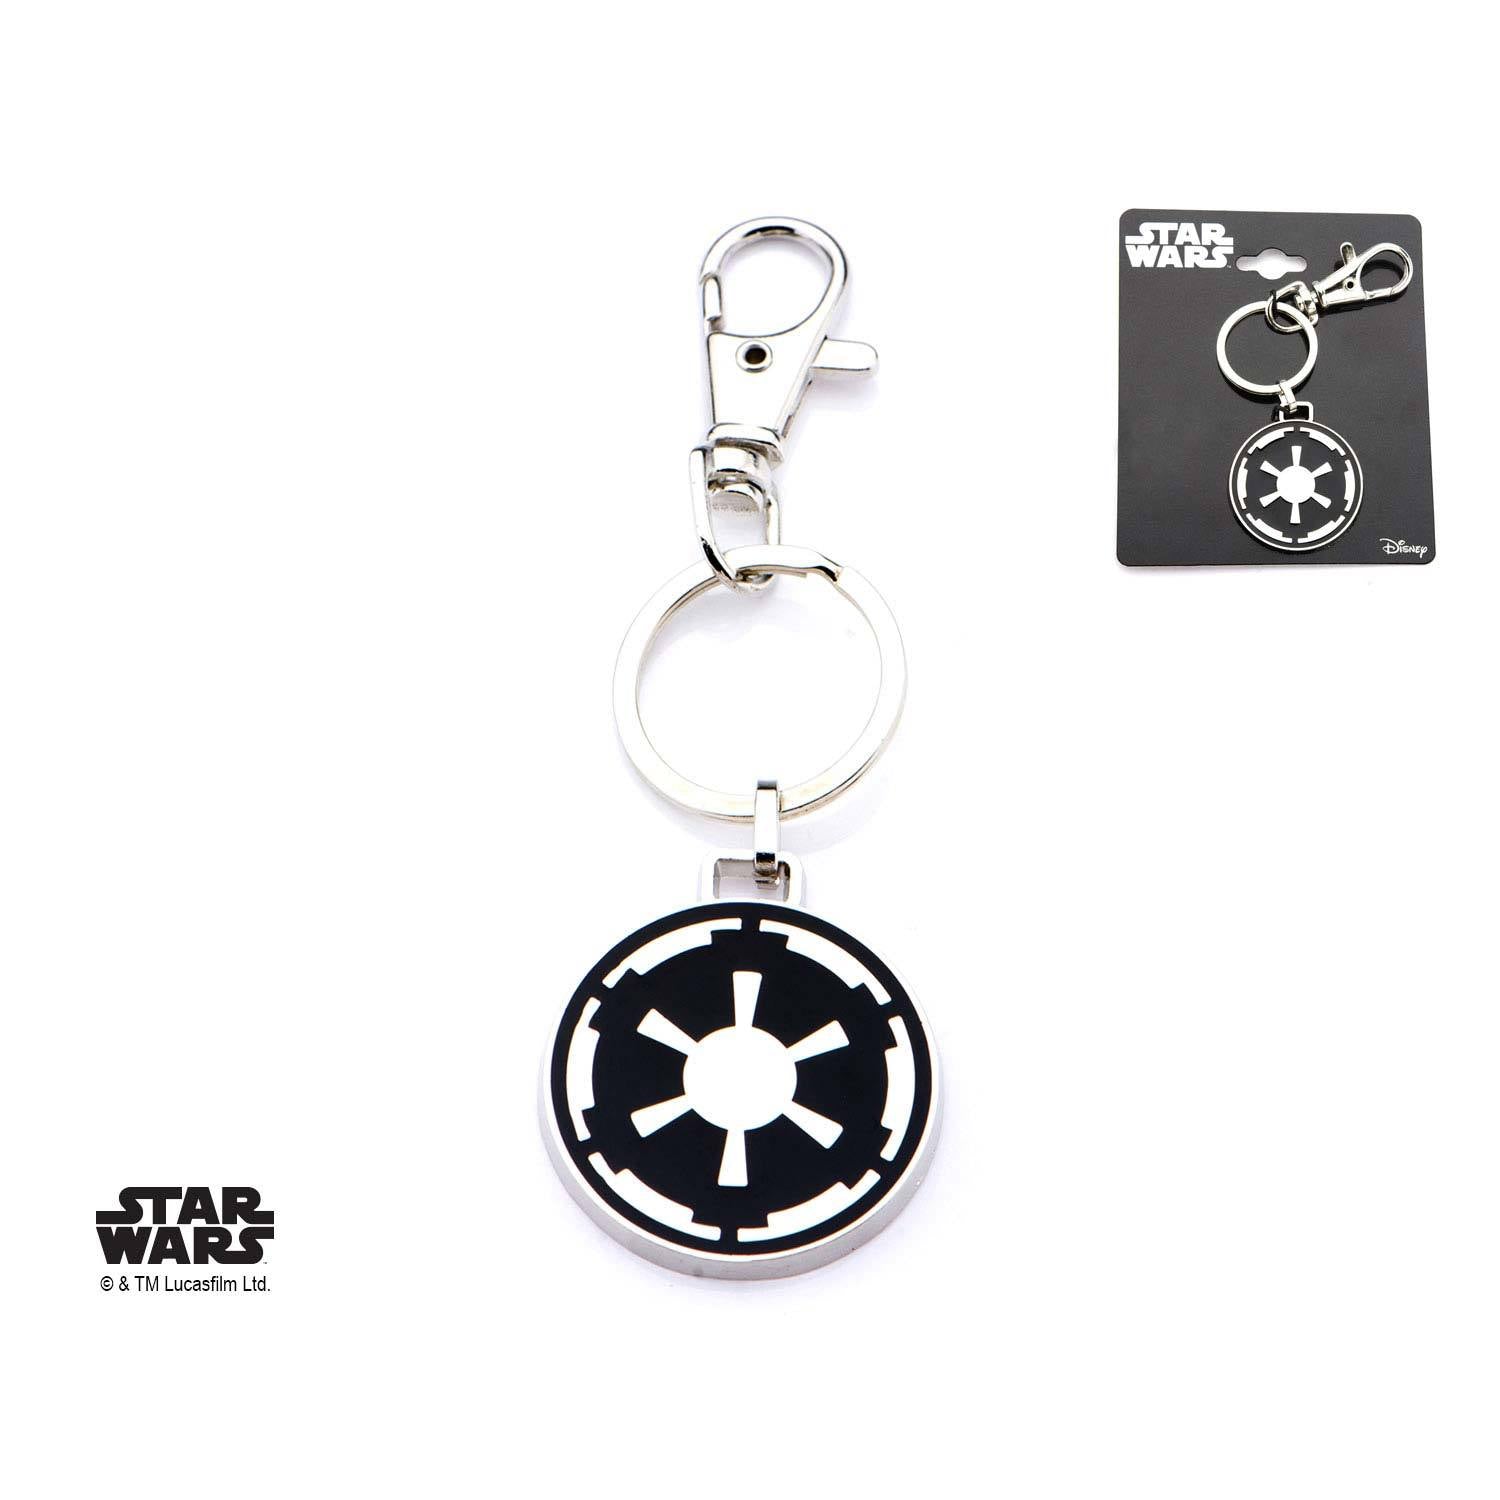 Star Wars Imperial Symbol Keychain [COMING SOON]